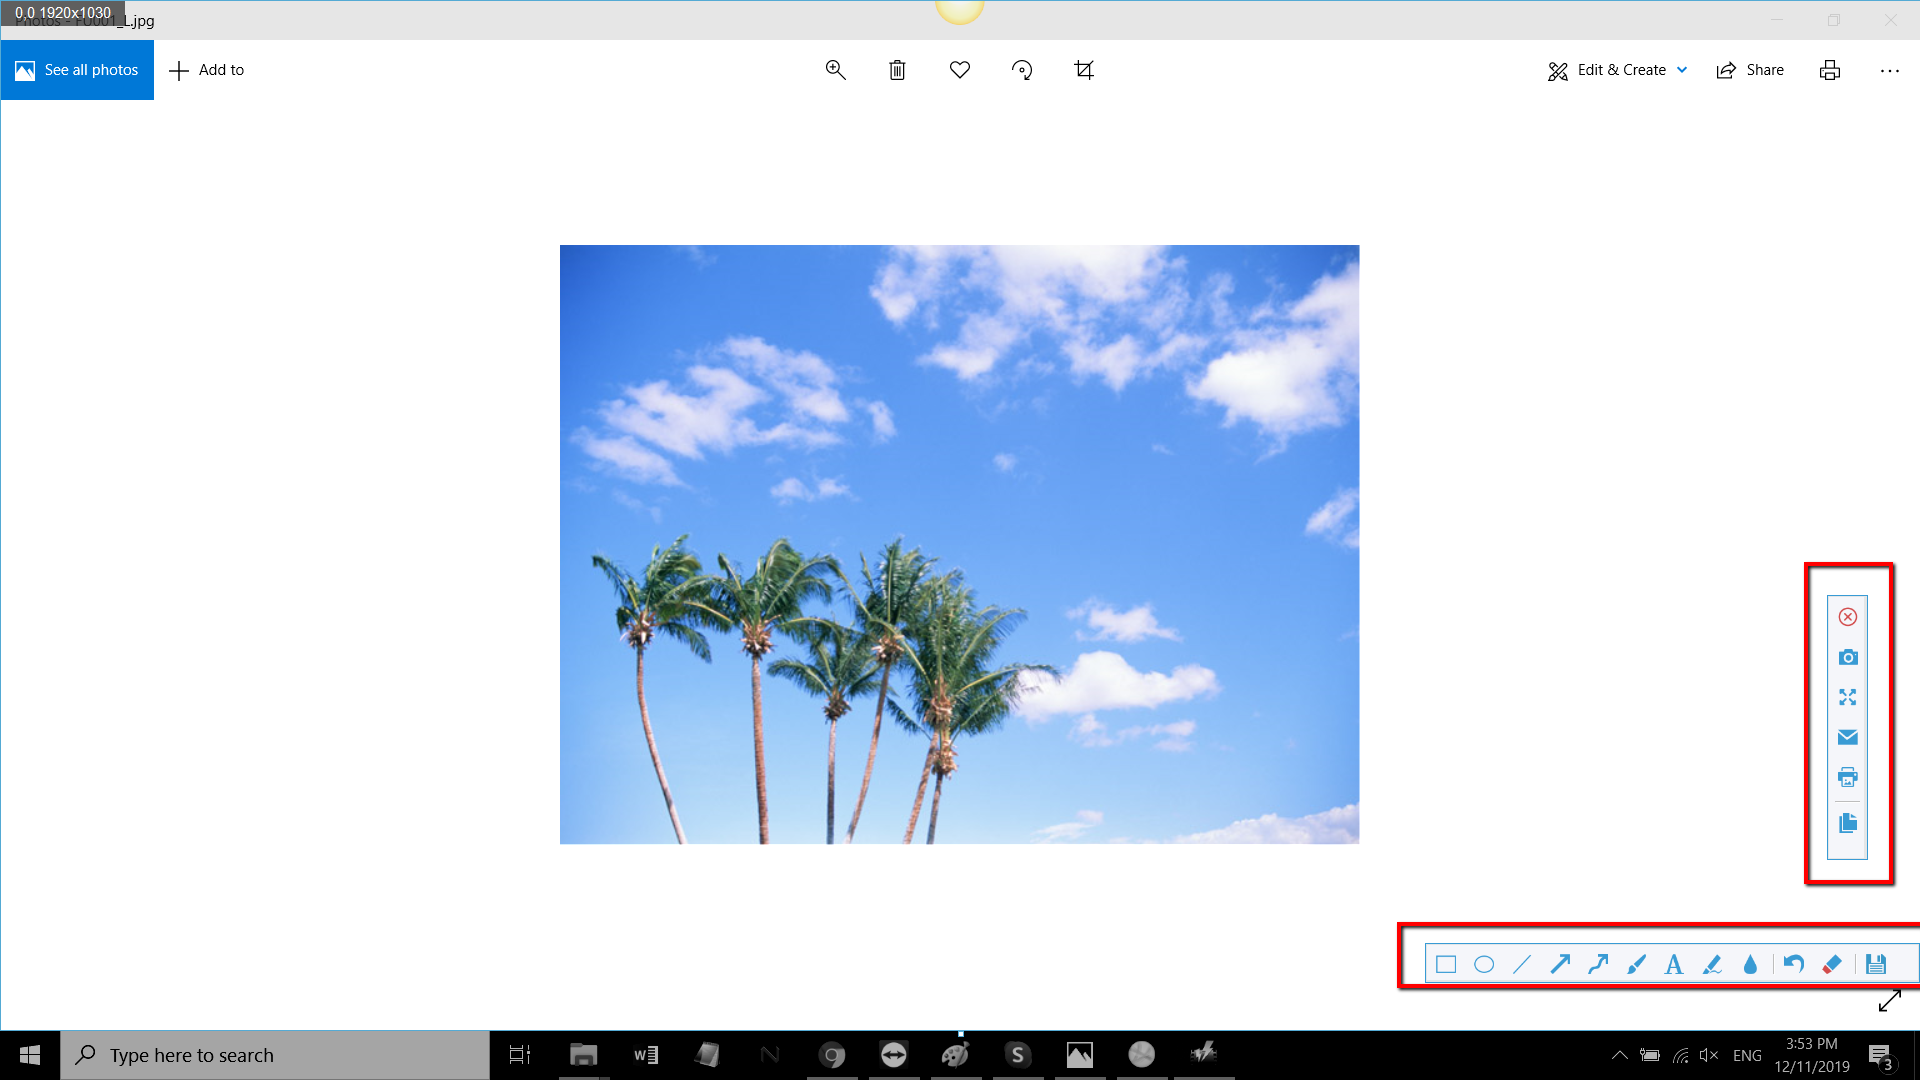 screenshots on Windows 10, VideoPower GREEN make changes to settings.